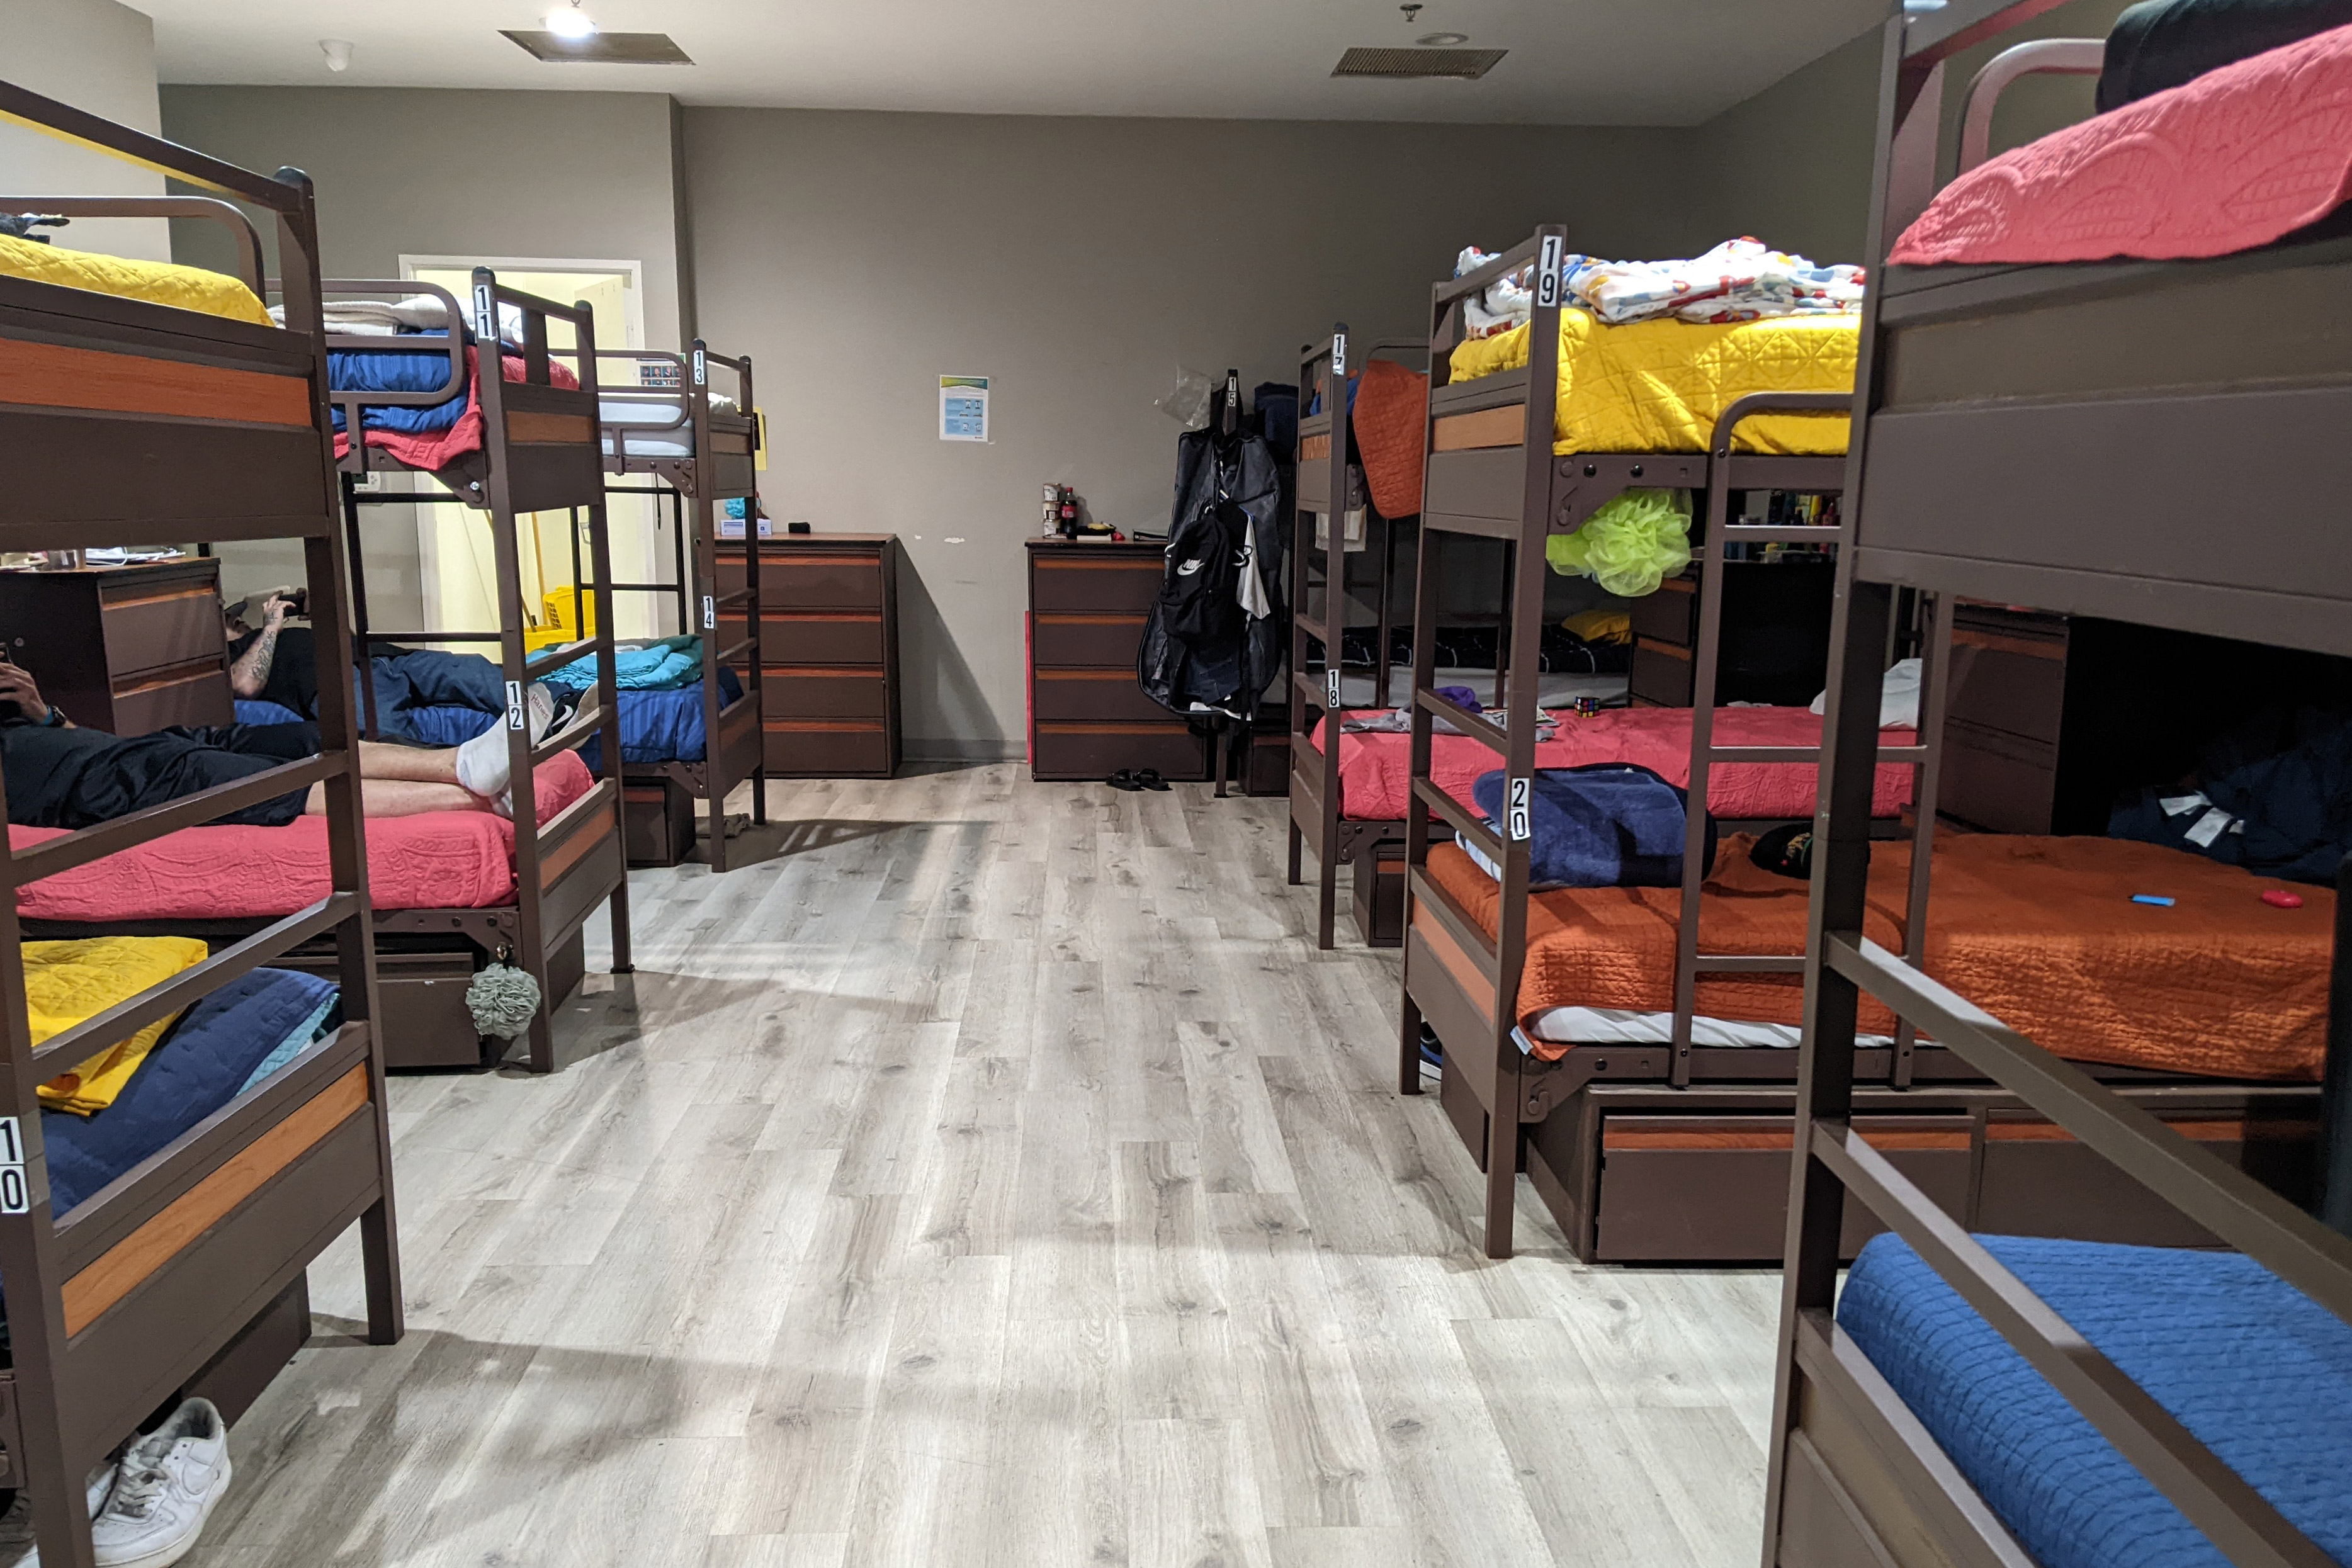 A photo of bunk beds in a treatment center dormitory.